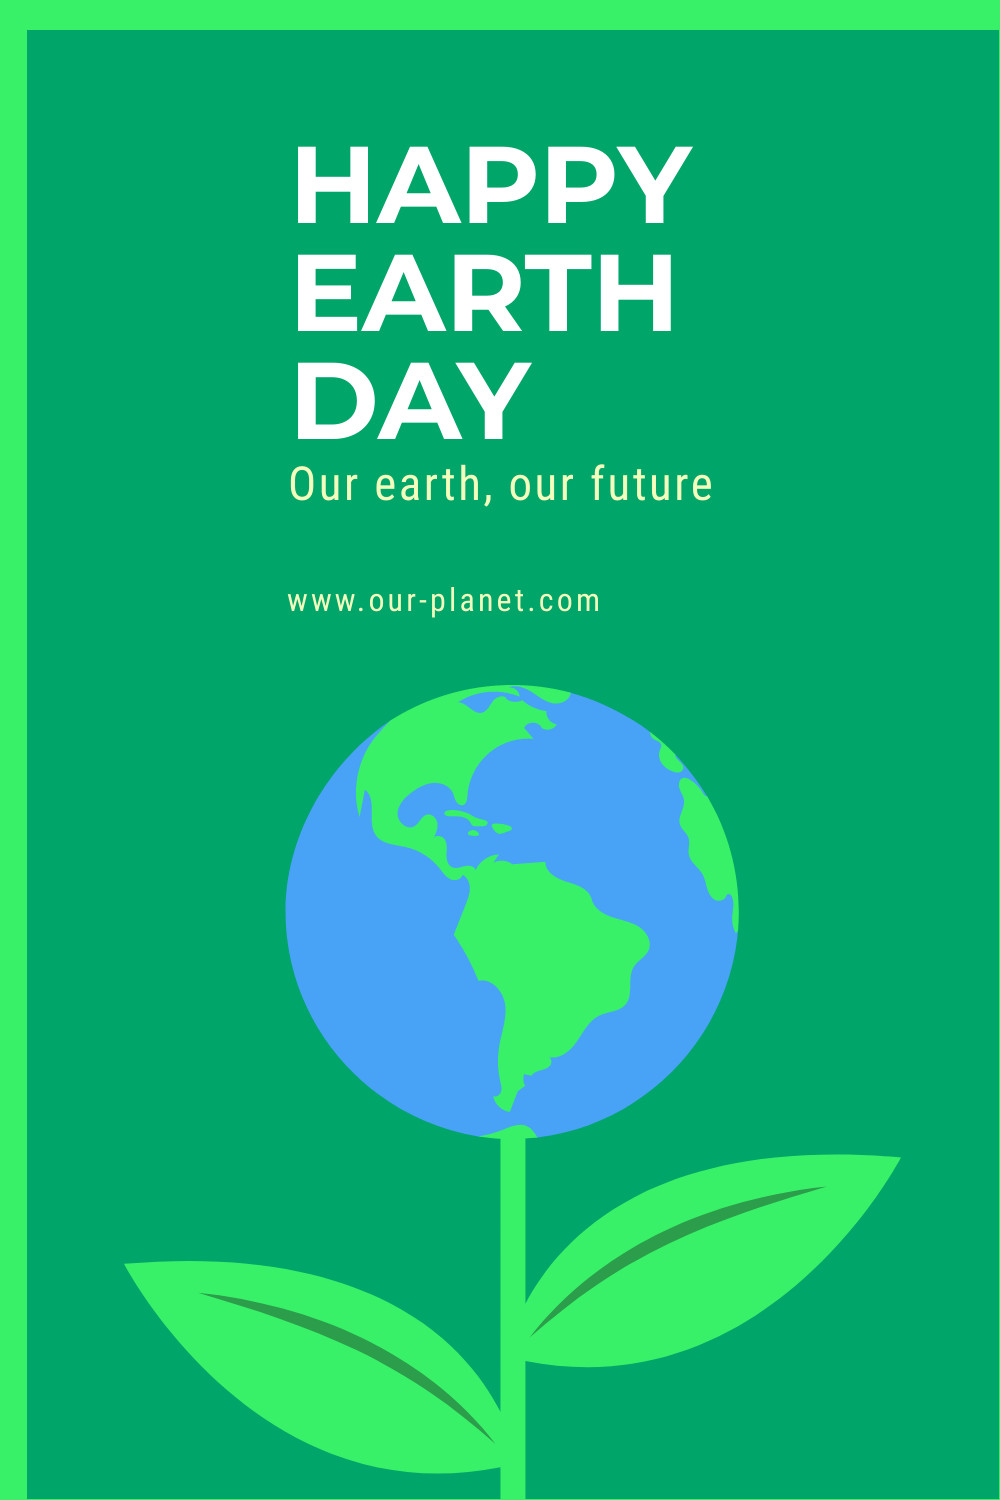  Happy Earth Day for Our Future Facebook Cover 820x360